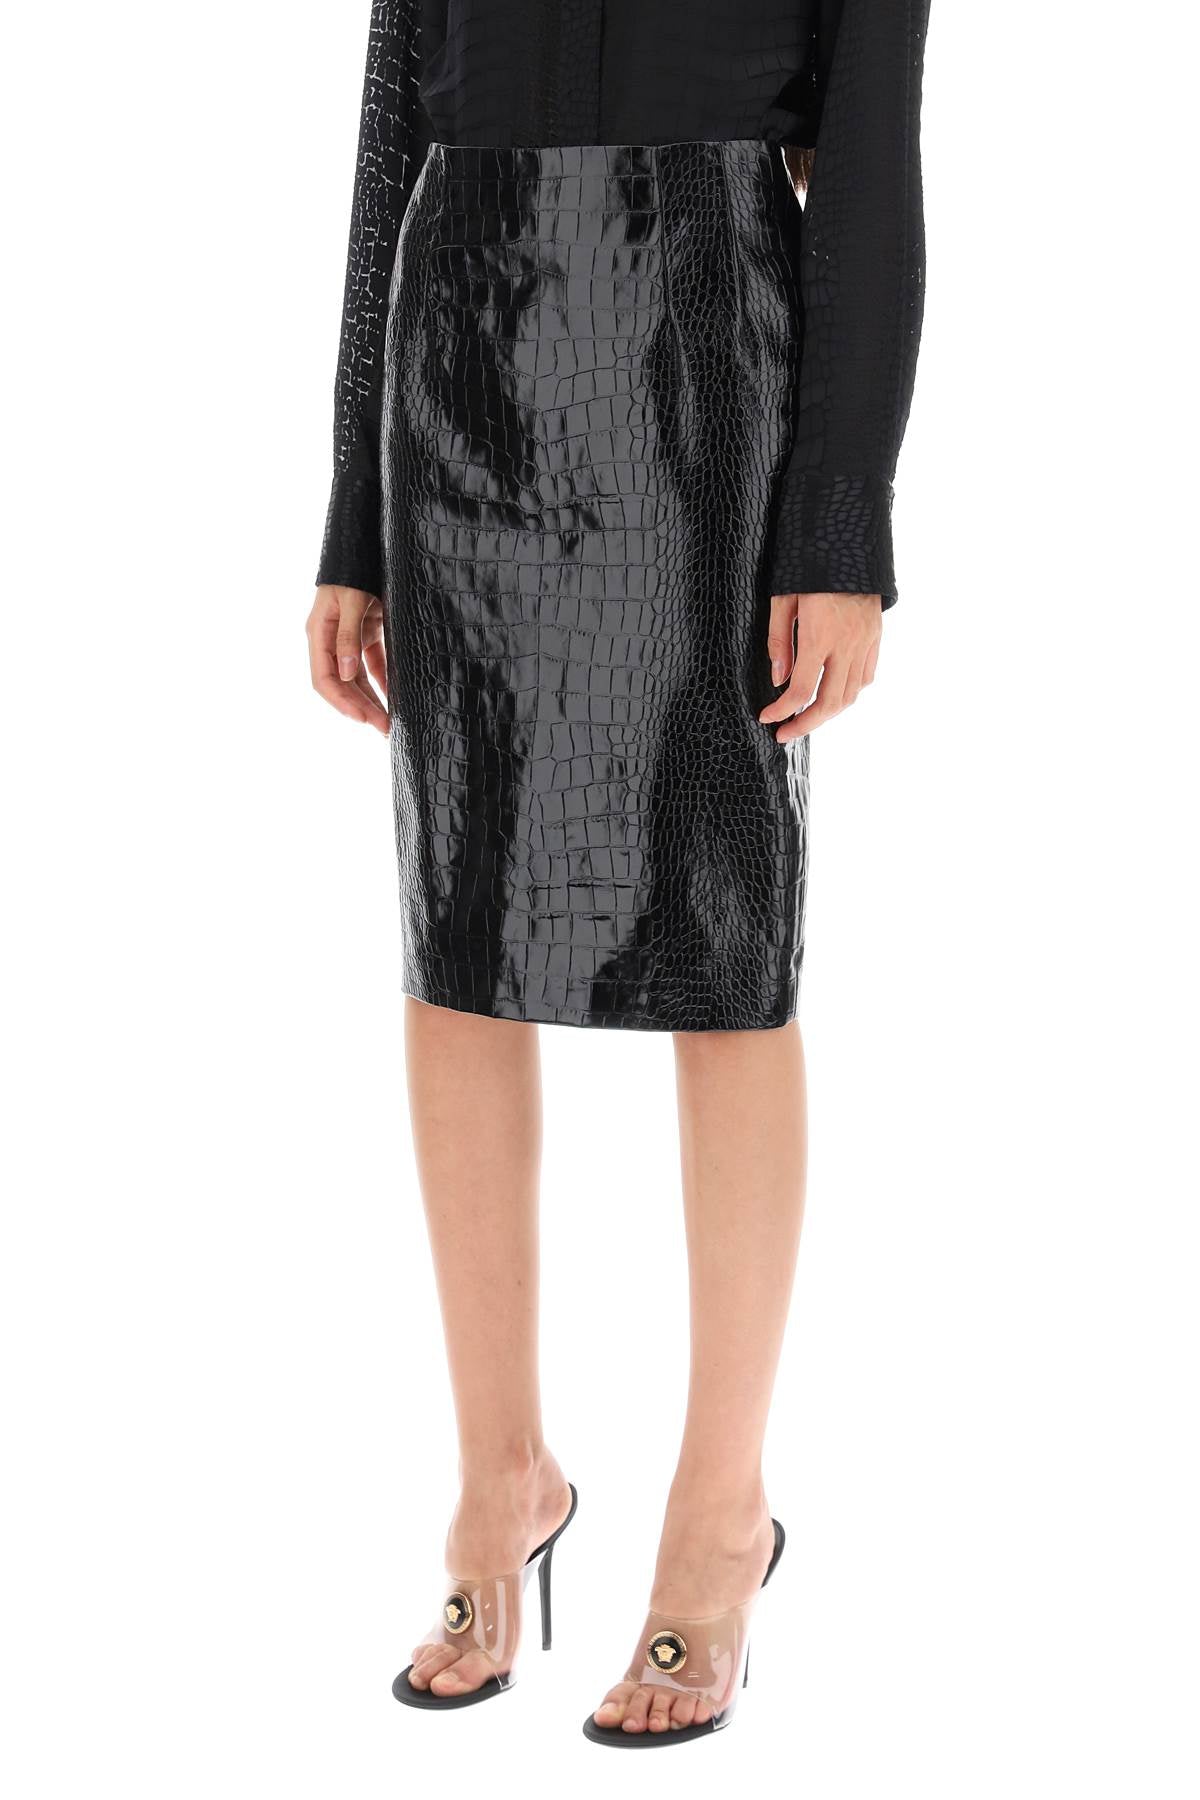 Versace croco-effect leather pencil skirt-3